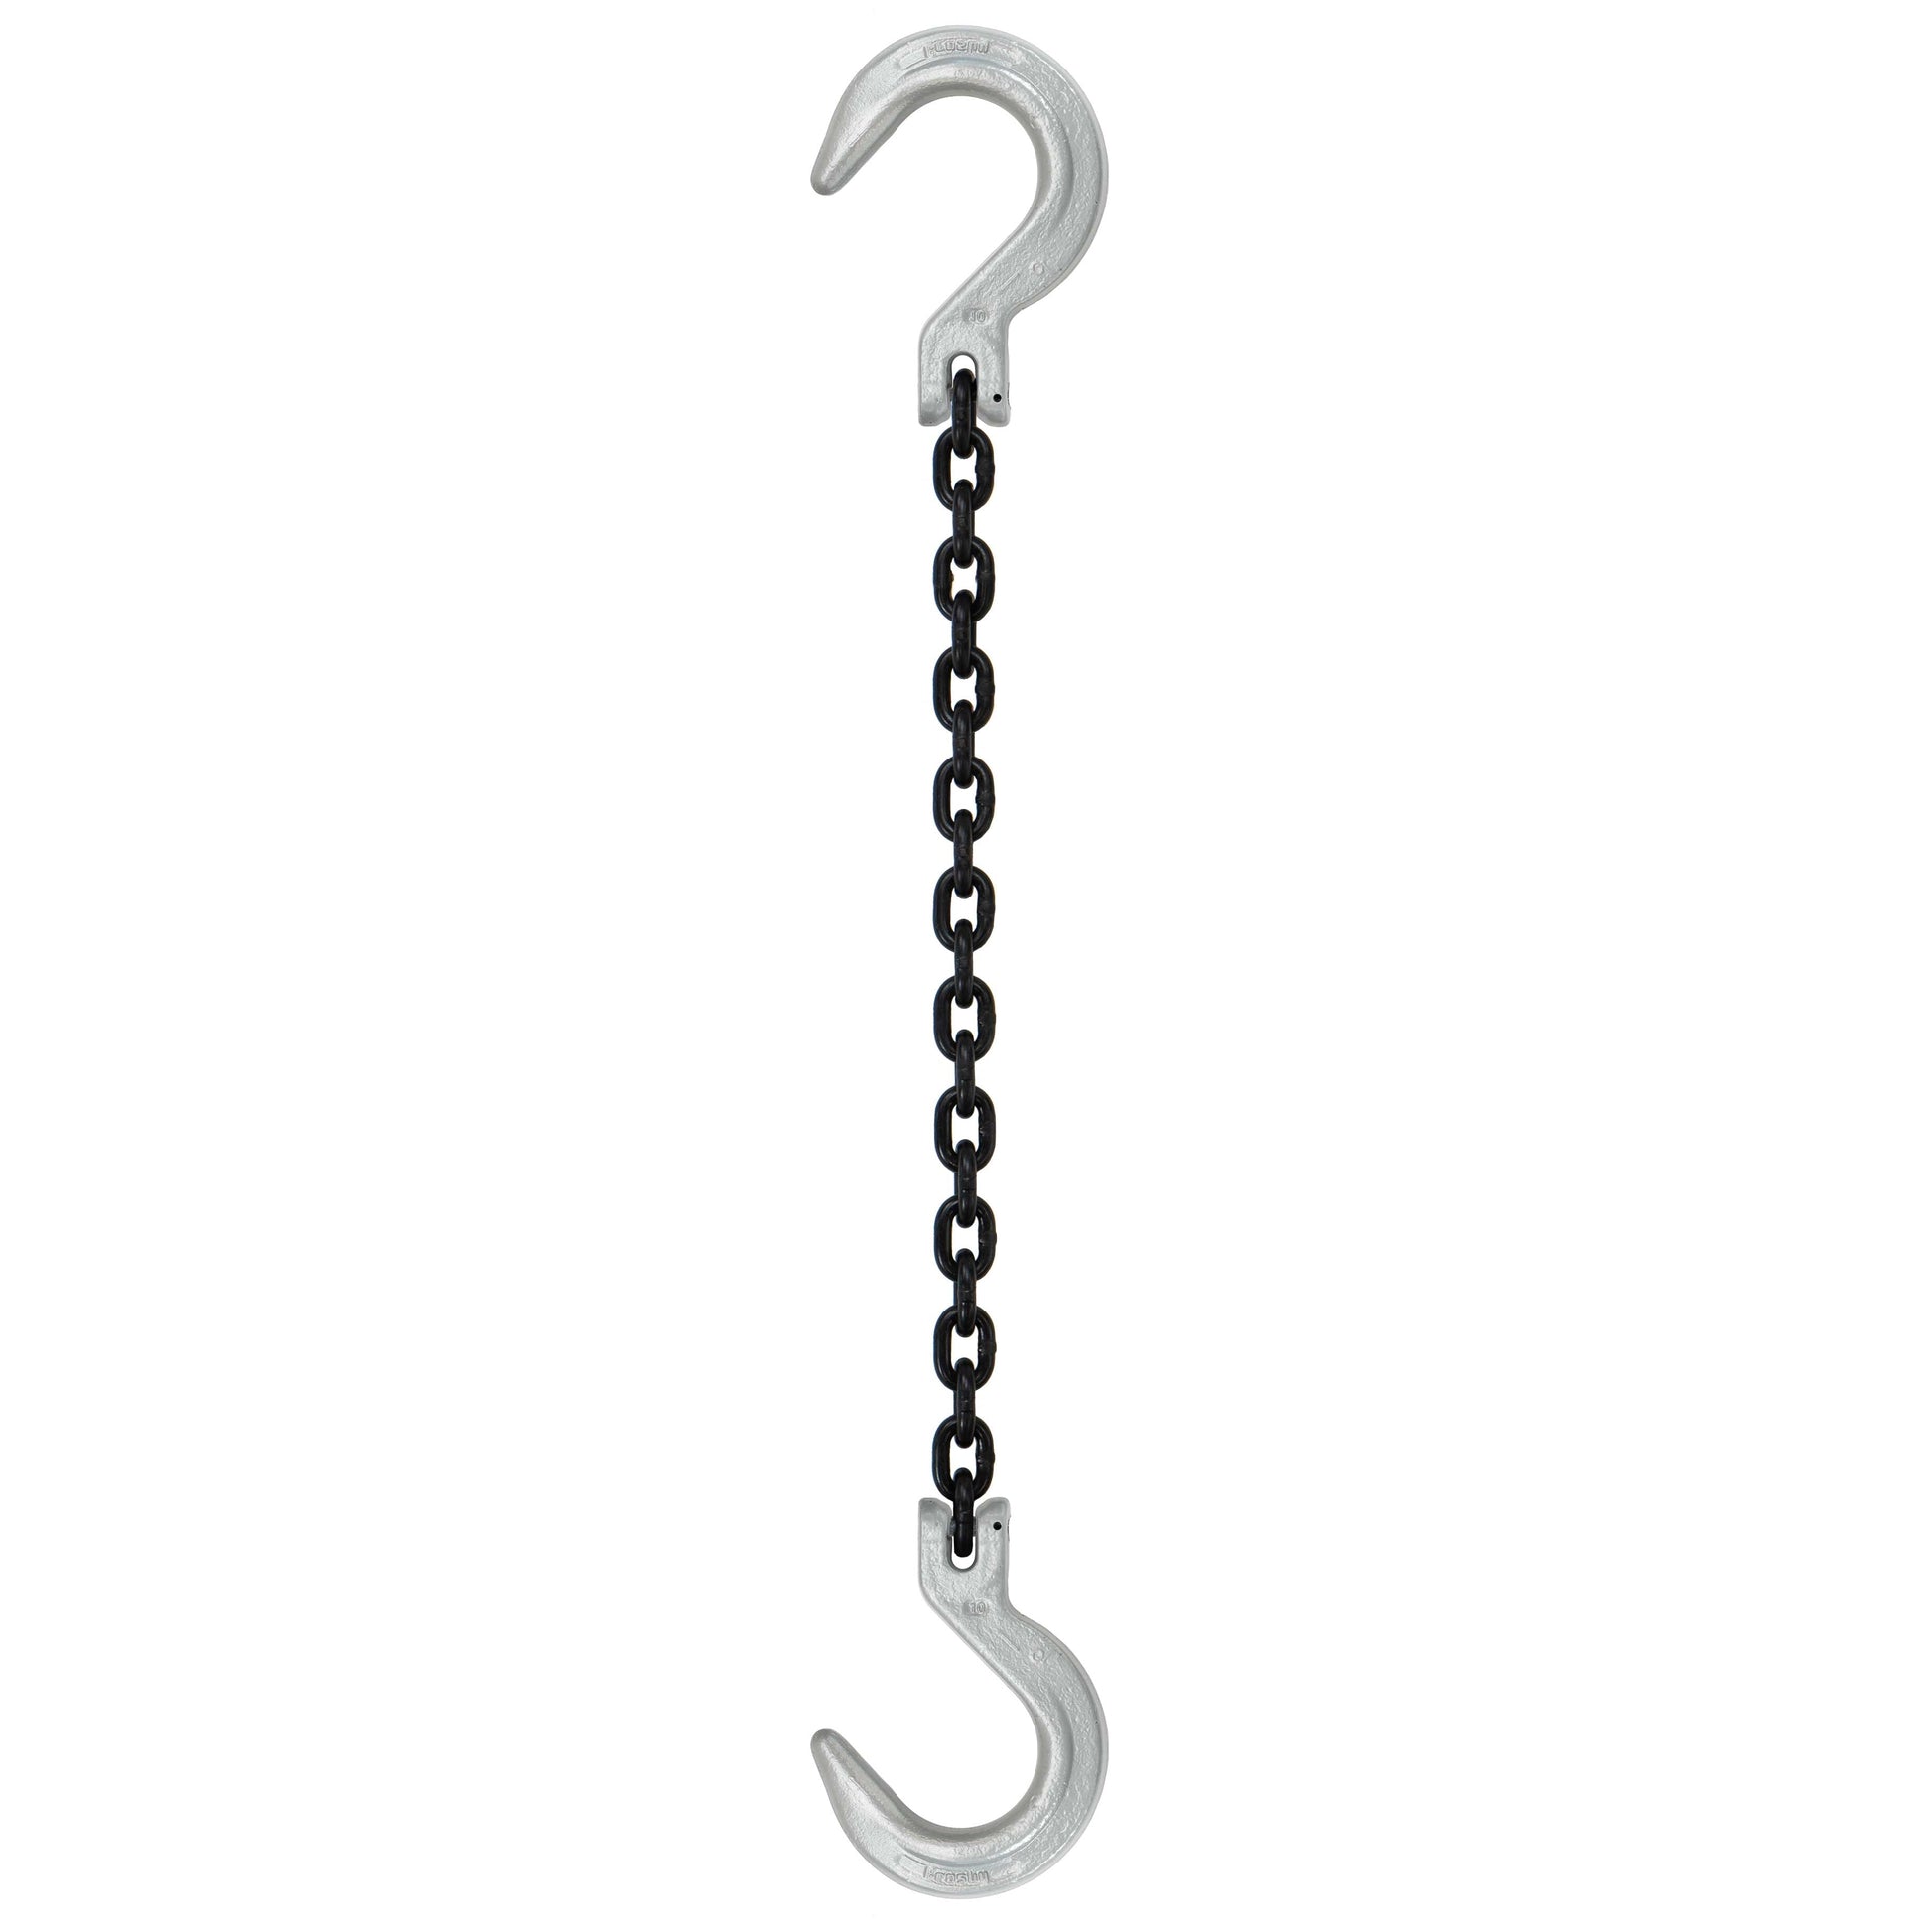 932 inch x 6 foot Domestic Single Leg Chain Sling w Crosby Foundry & Foundry Hooks Grade 100 image 1 of 2